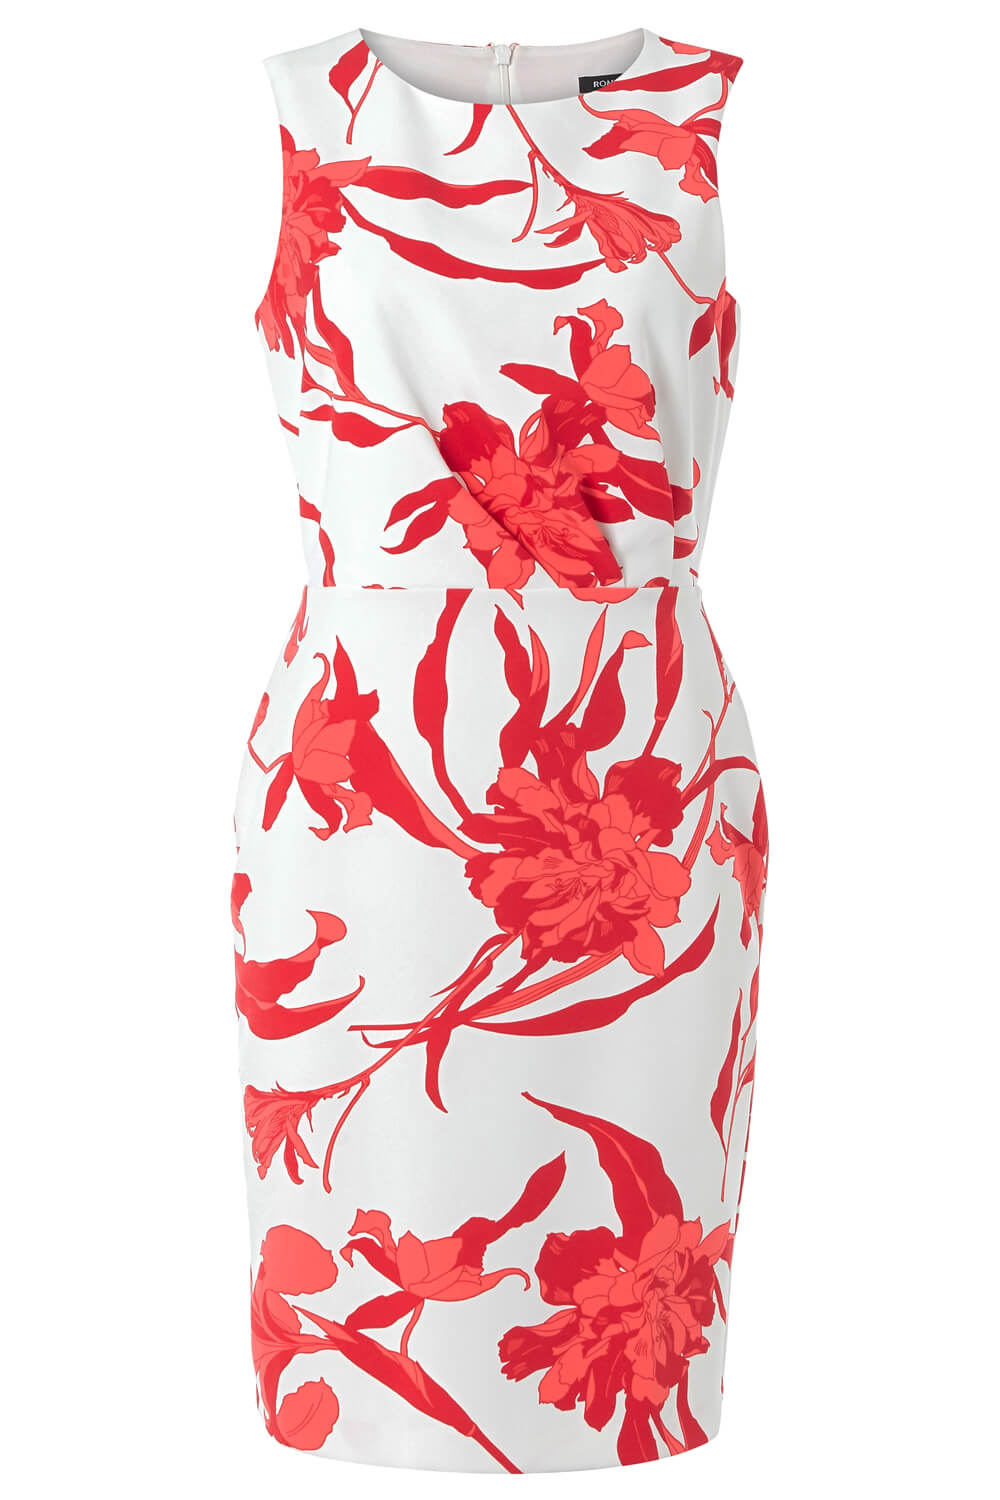 Red Floral Print Scuba Dress, Image 5 of 5